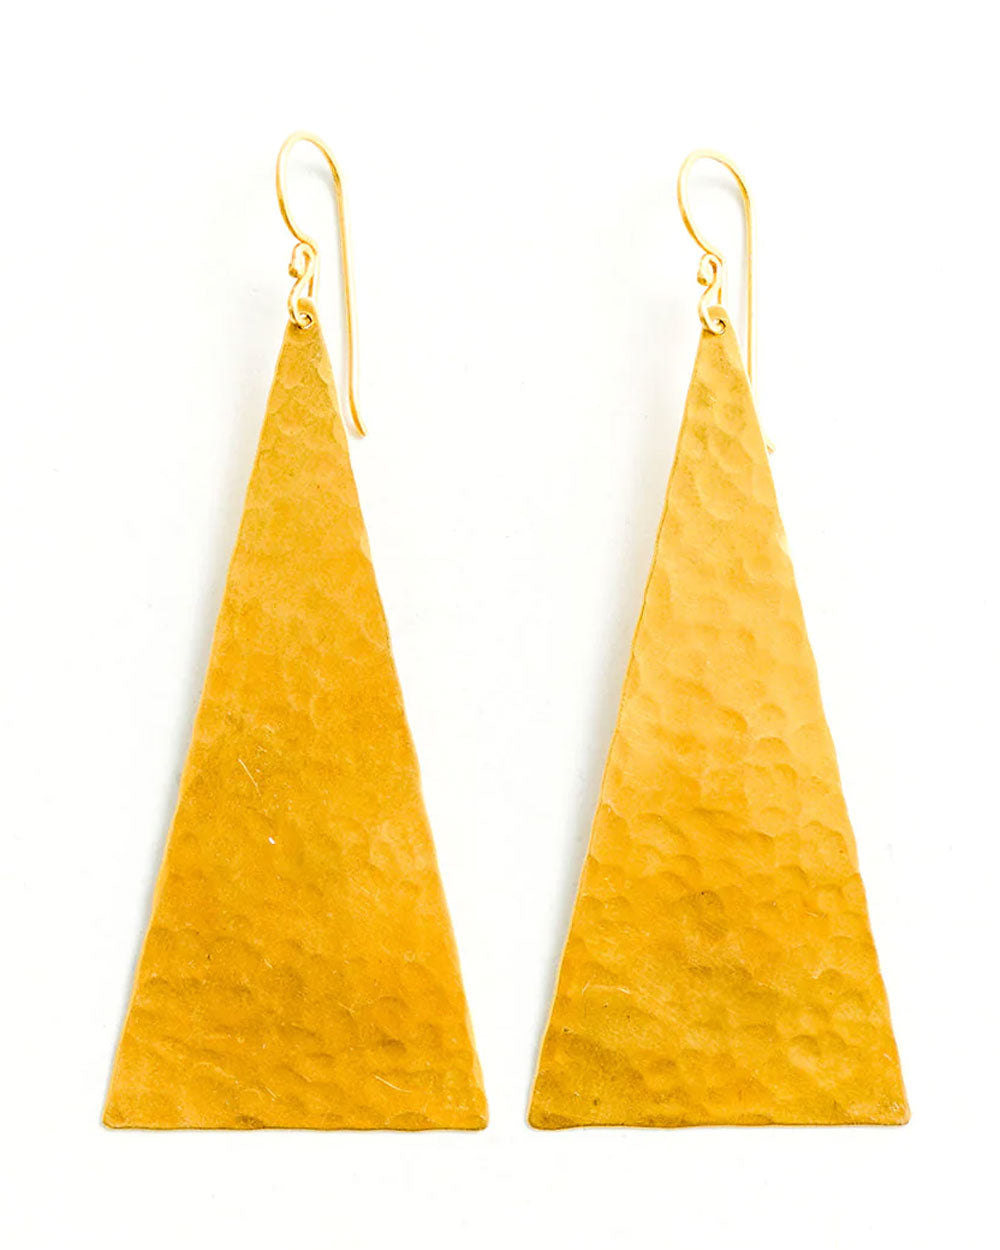 Giant Gold Triangle Earrings